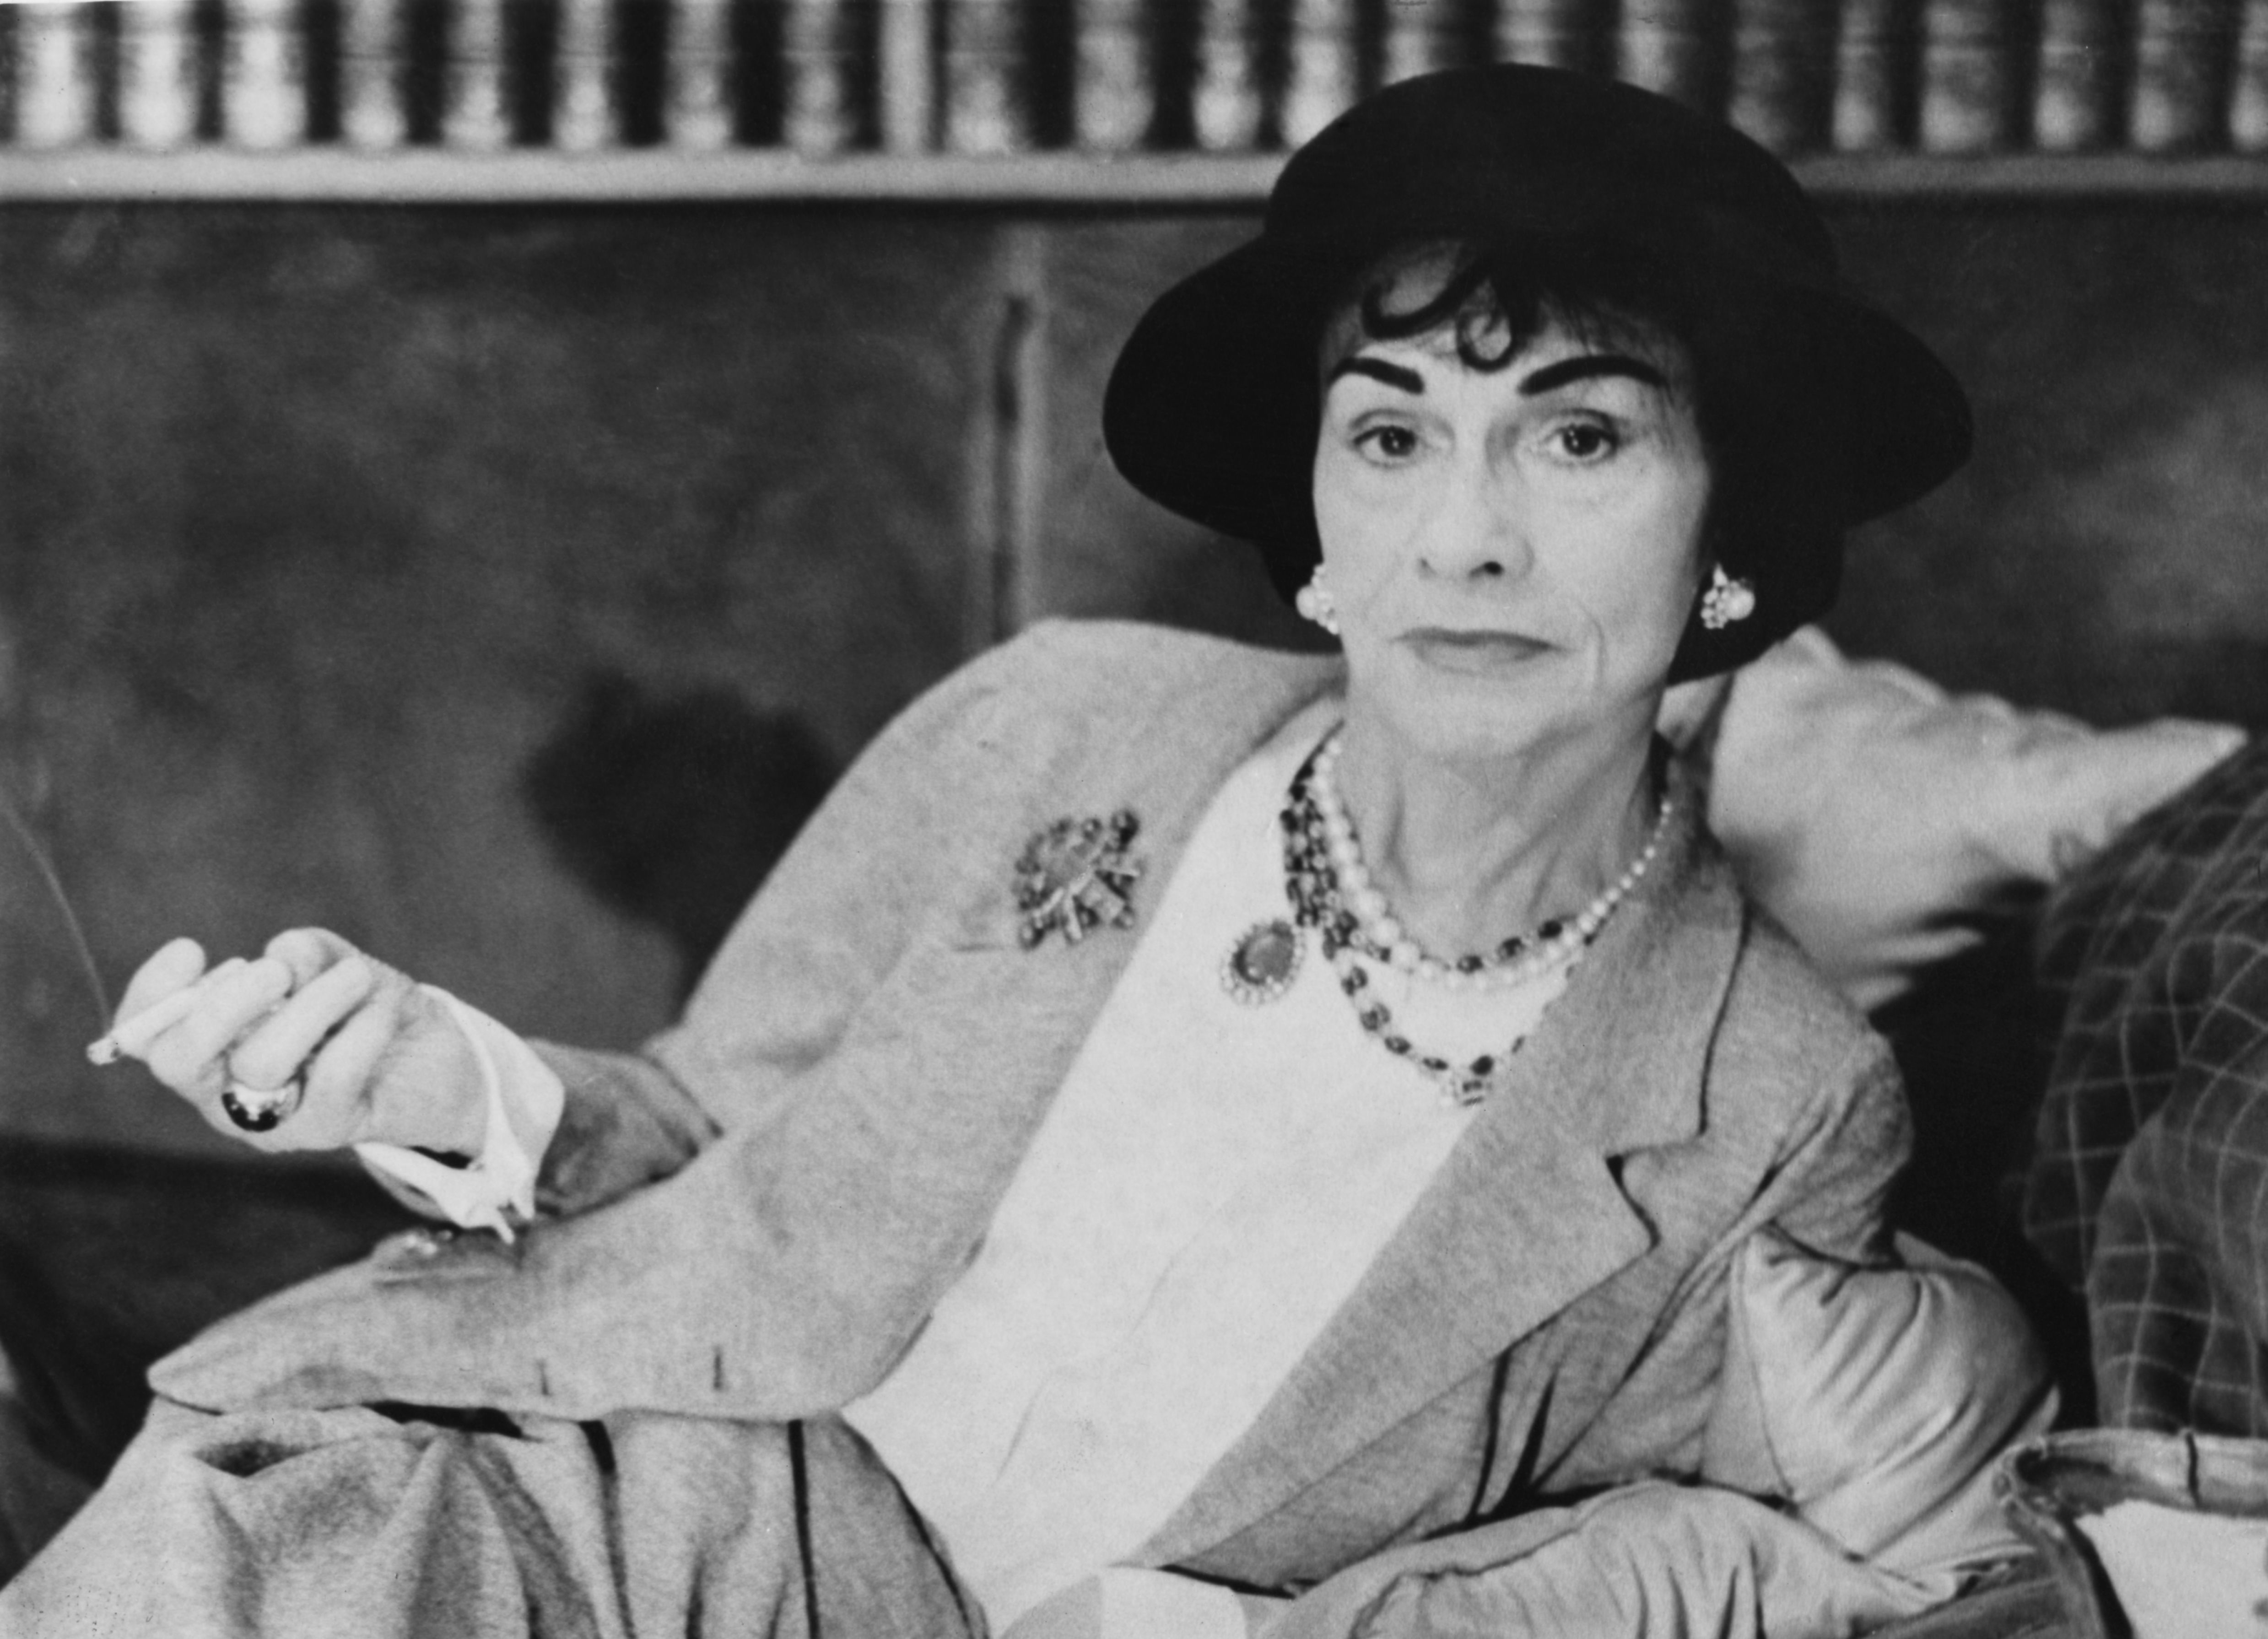 Coco Chanel Top 10 Inspirational Quotes For Women Of Today